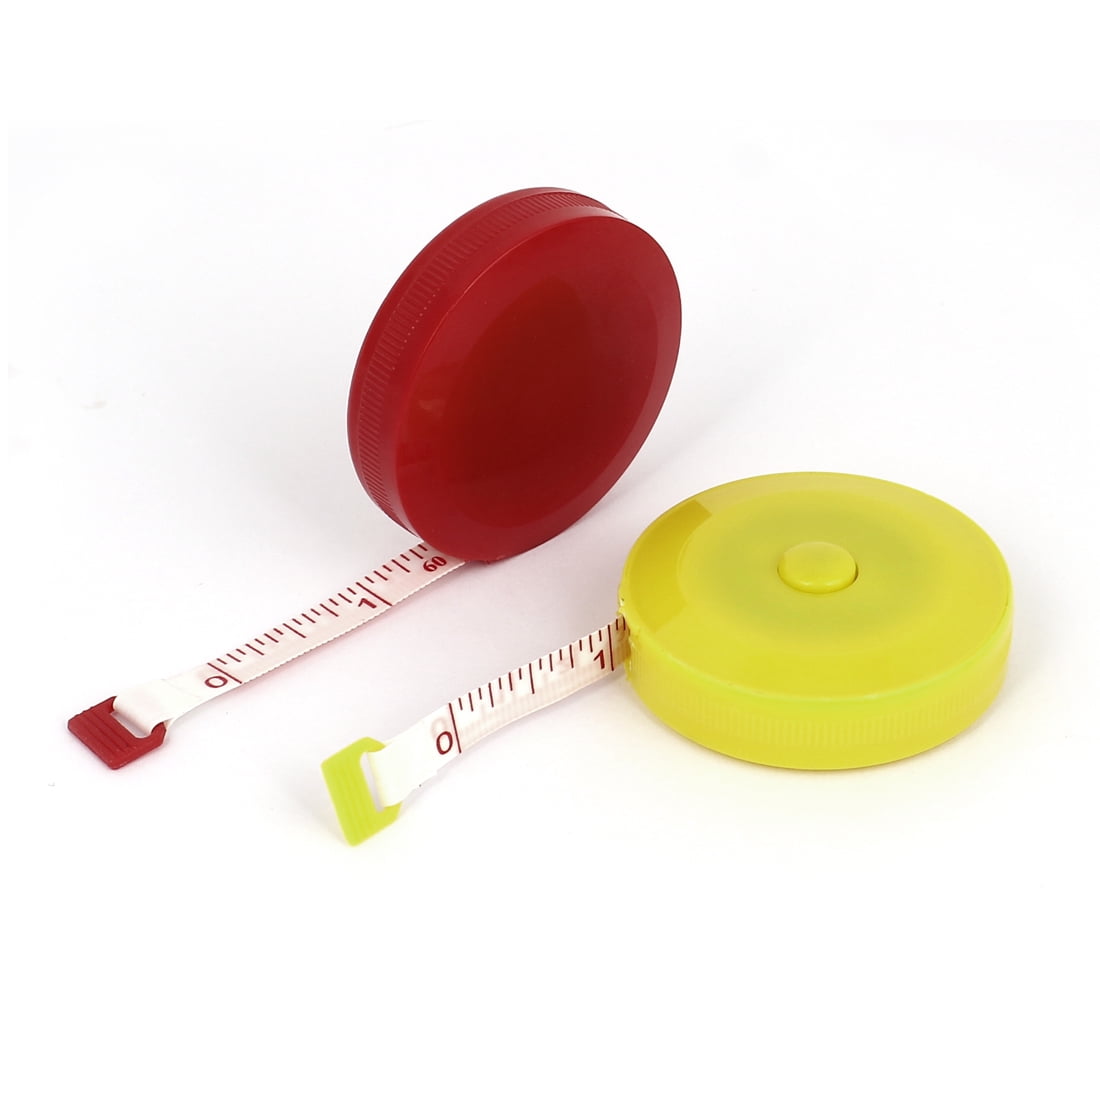 Retractable Soft Ruler Tape Tailor Sewing Cloth Diet Measuring 60Inch/150cm AER 